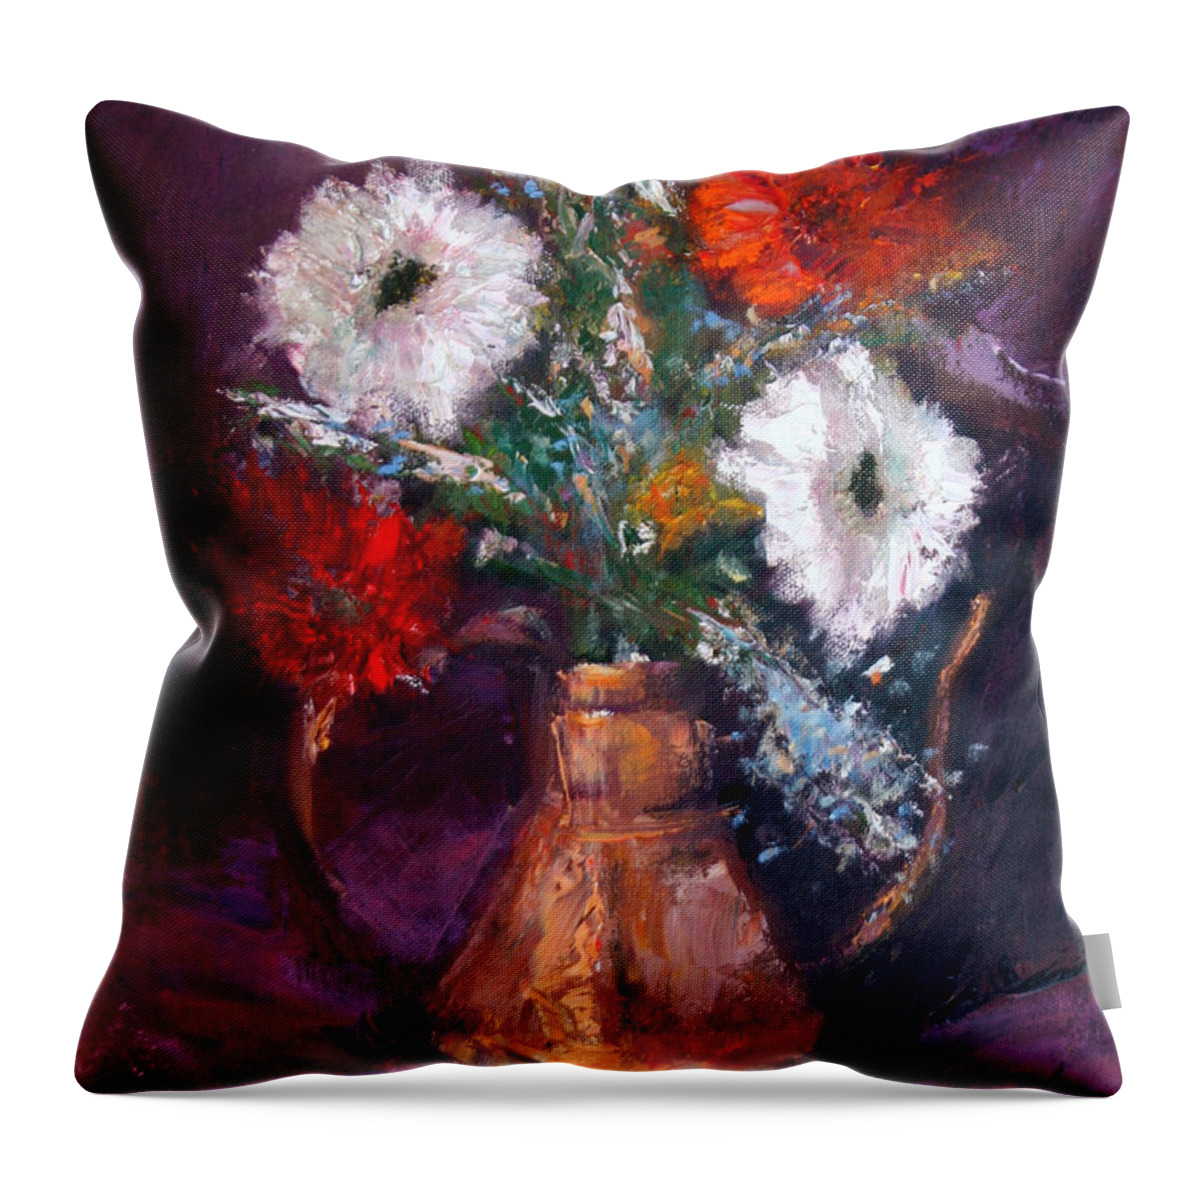 Gerber Daisy Throw Pillow featuring the painting Gerbers by Athena Mantle